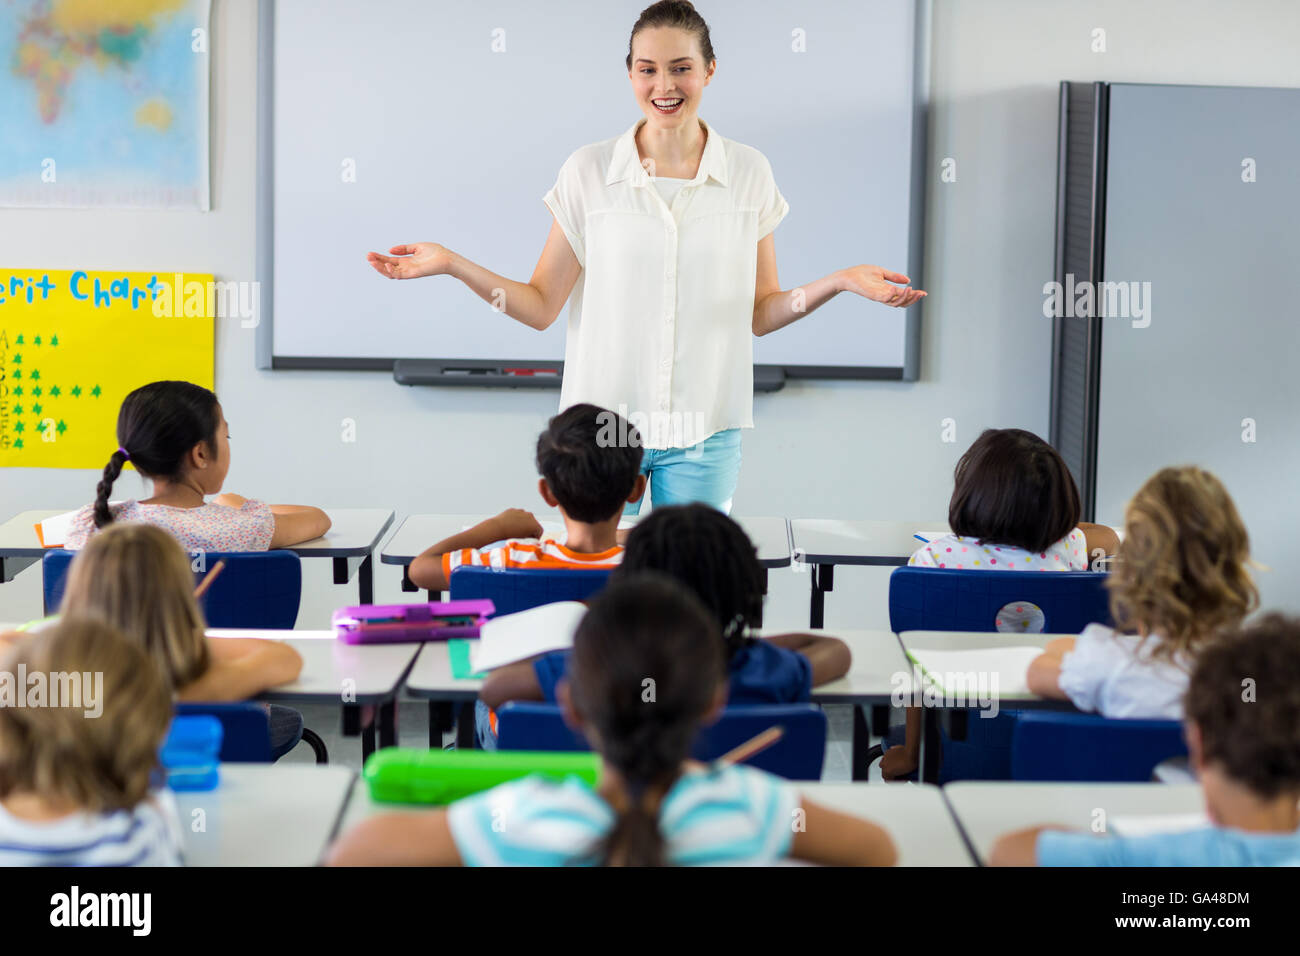 Teacher with arms outstretched in classroom Stock Photo